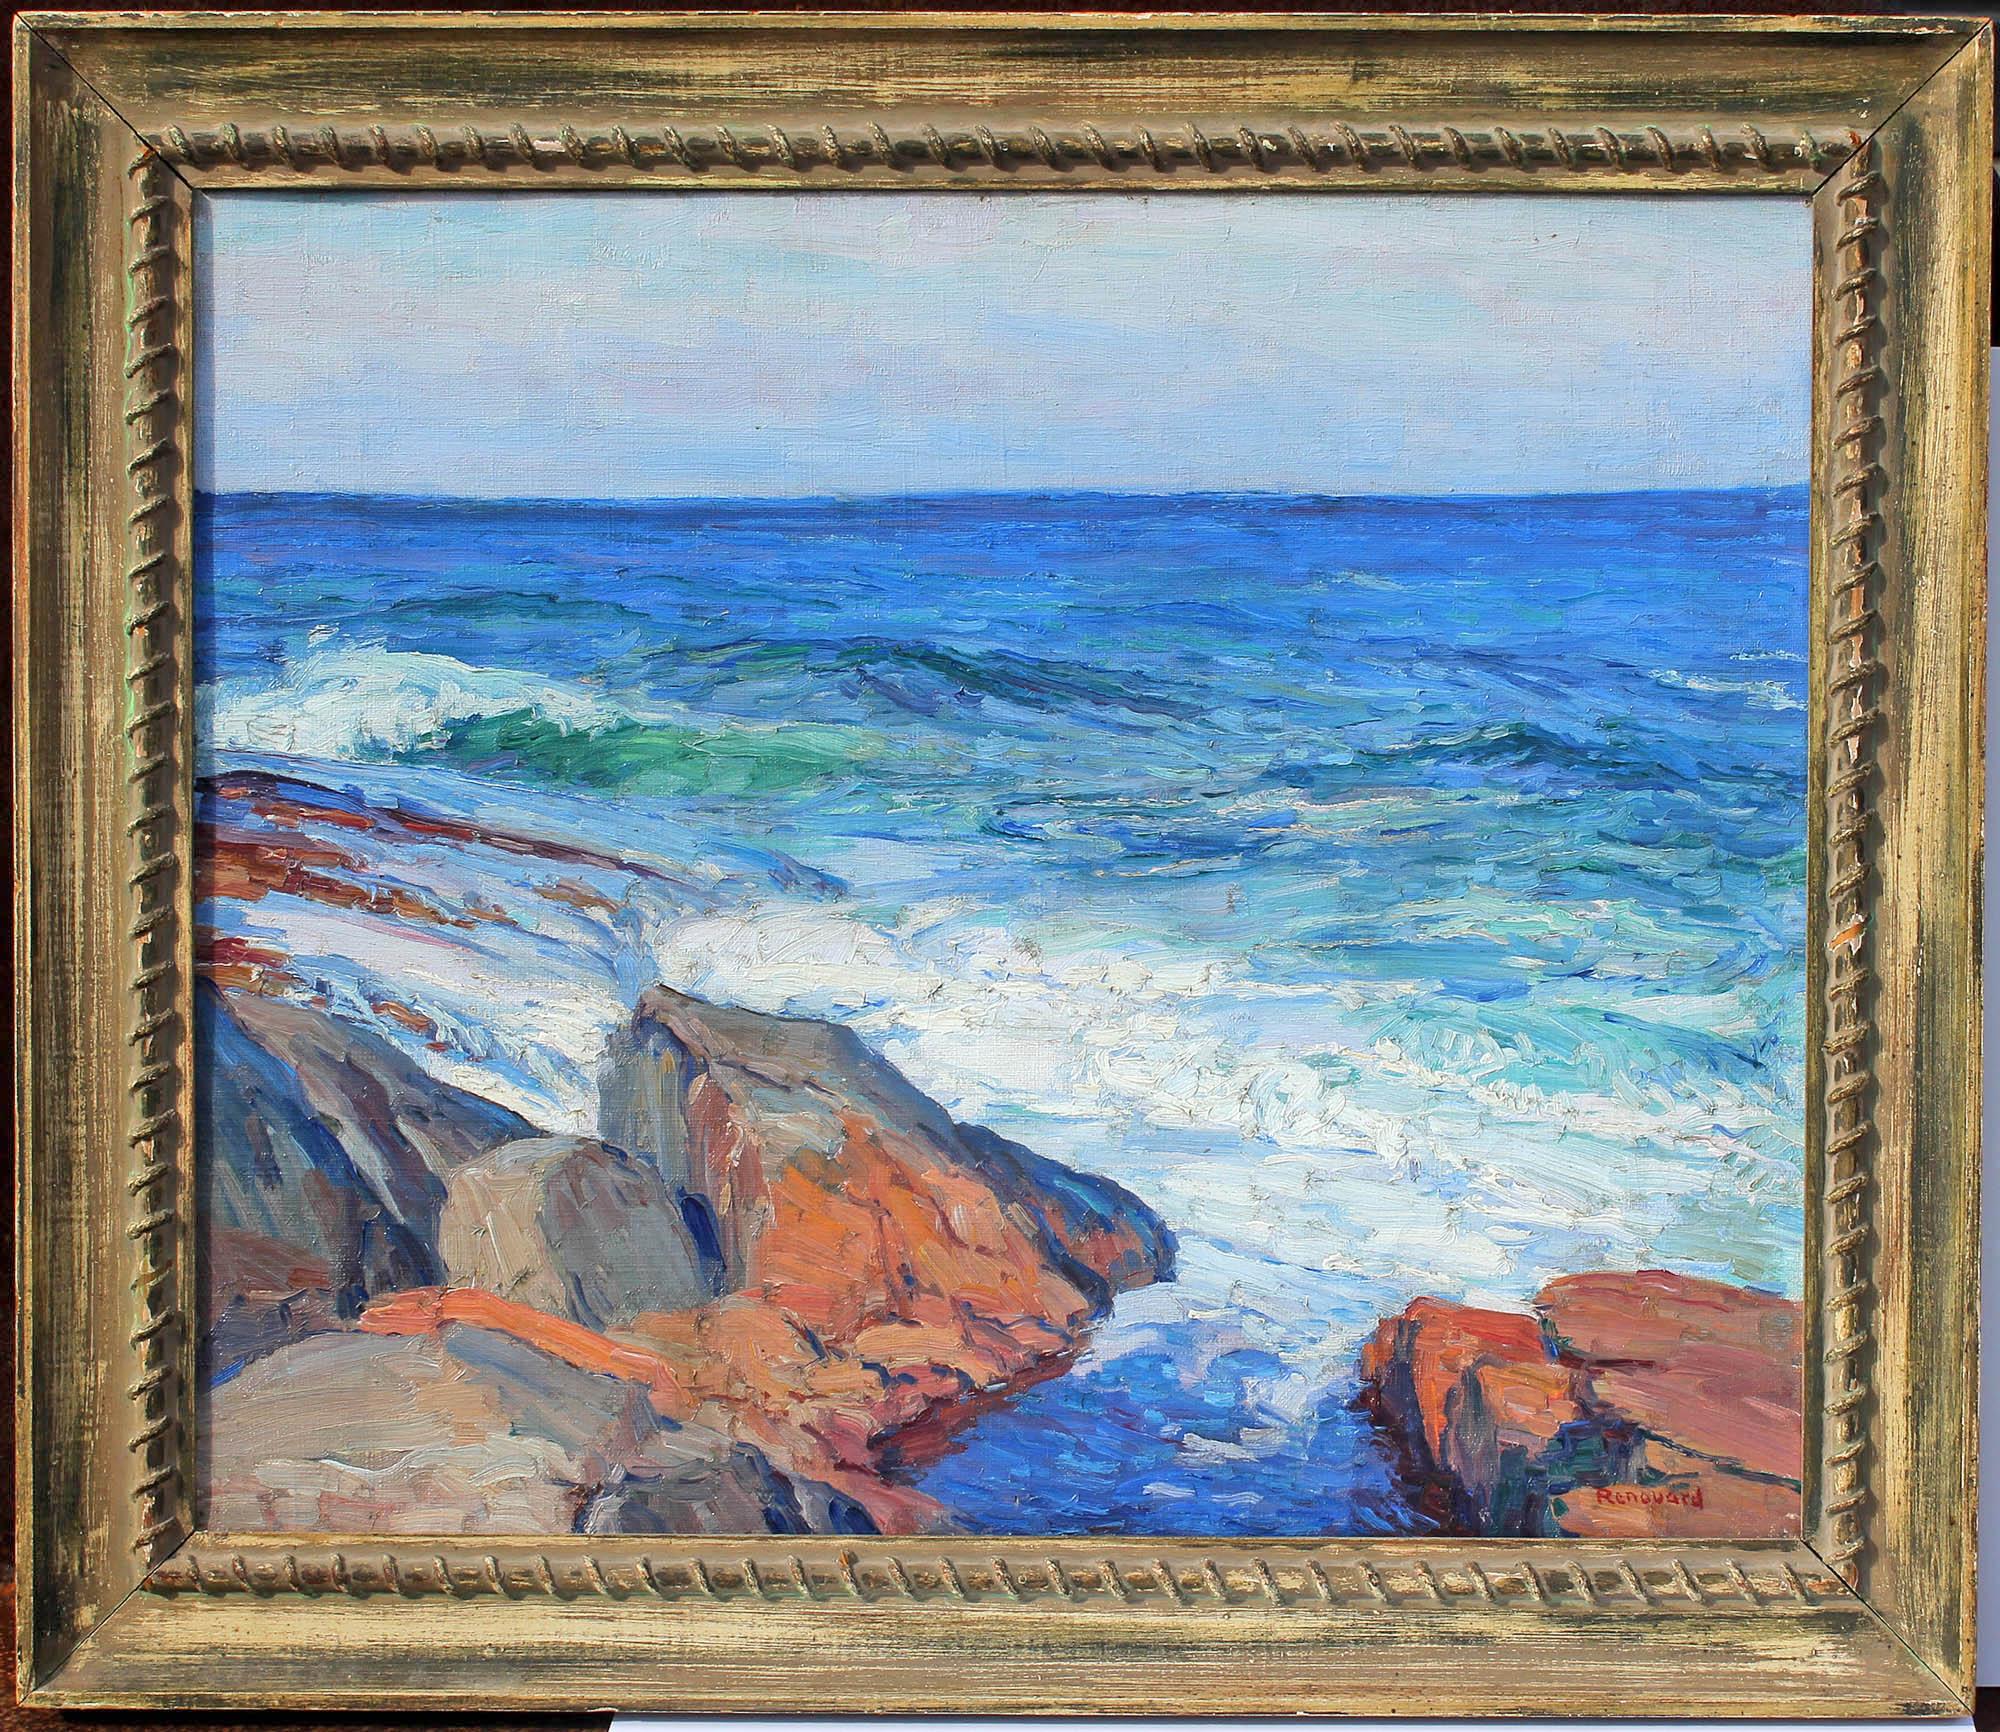 Impressionist American seascape, oil painting by George Renouard. Inscribed on reverse 